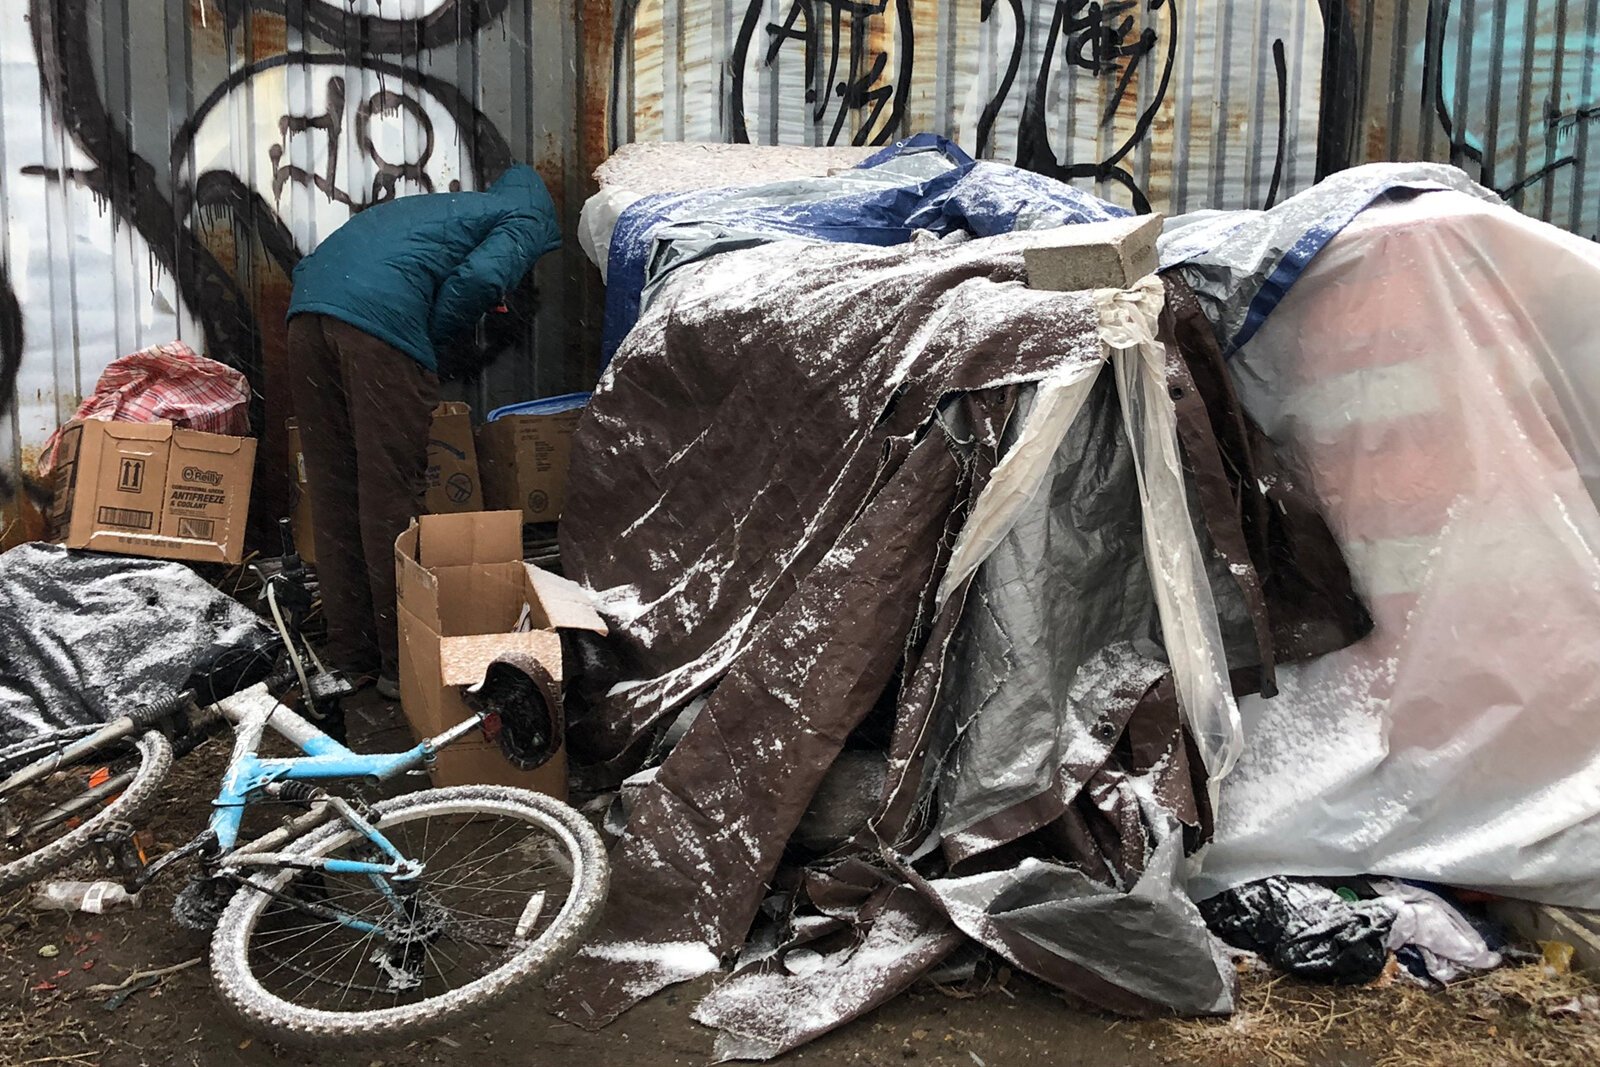 Stanley Stinson and his street team members seek out those far from the system, the “rough sleepers” who live under bridges, in alleyways, abandoned buildings, parks, and boulevards.